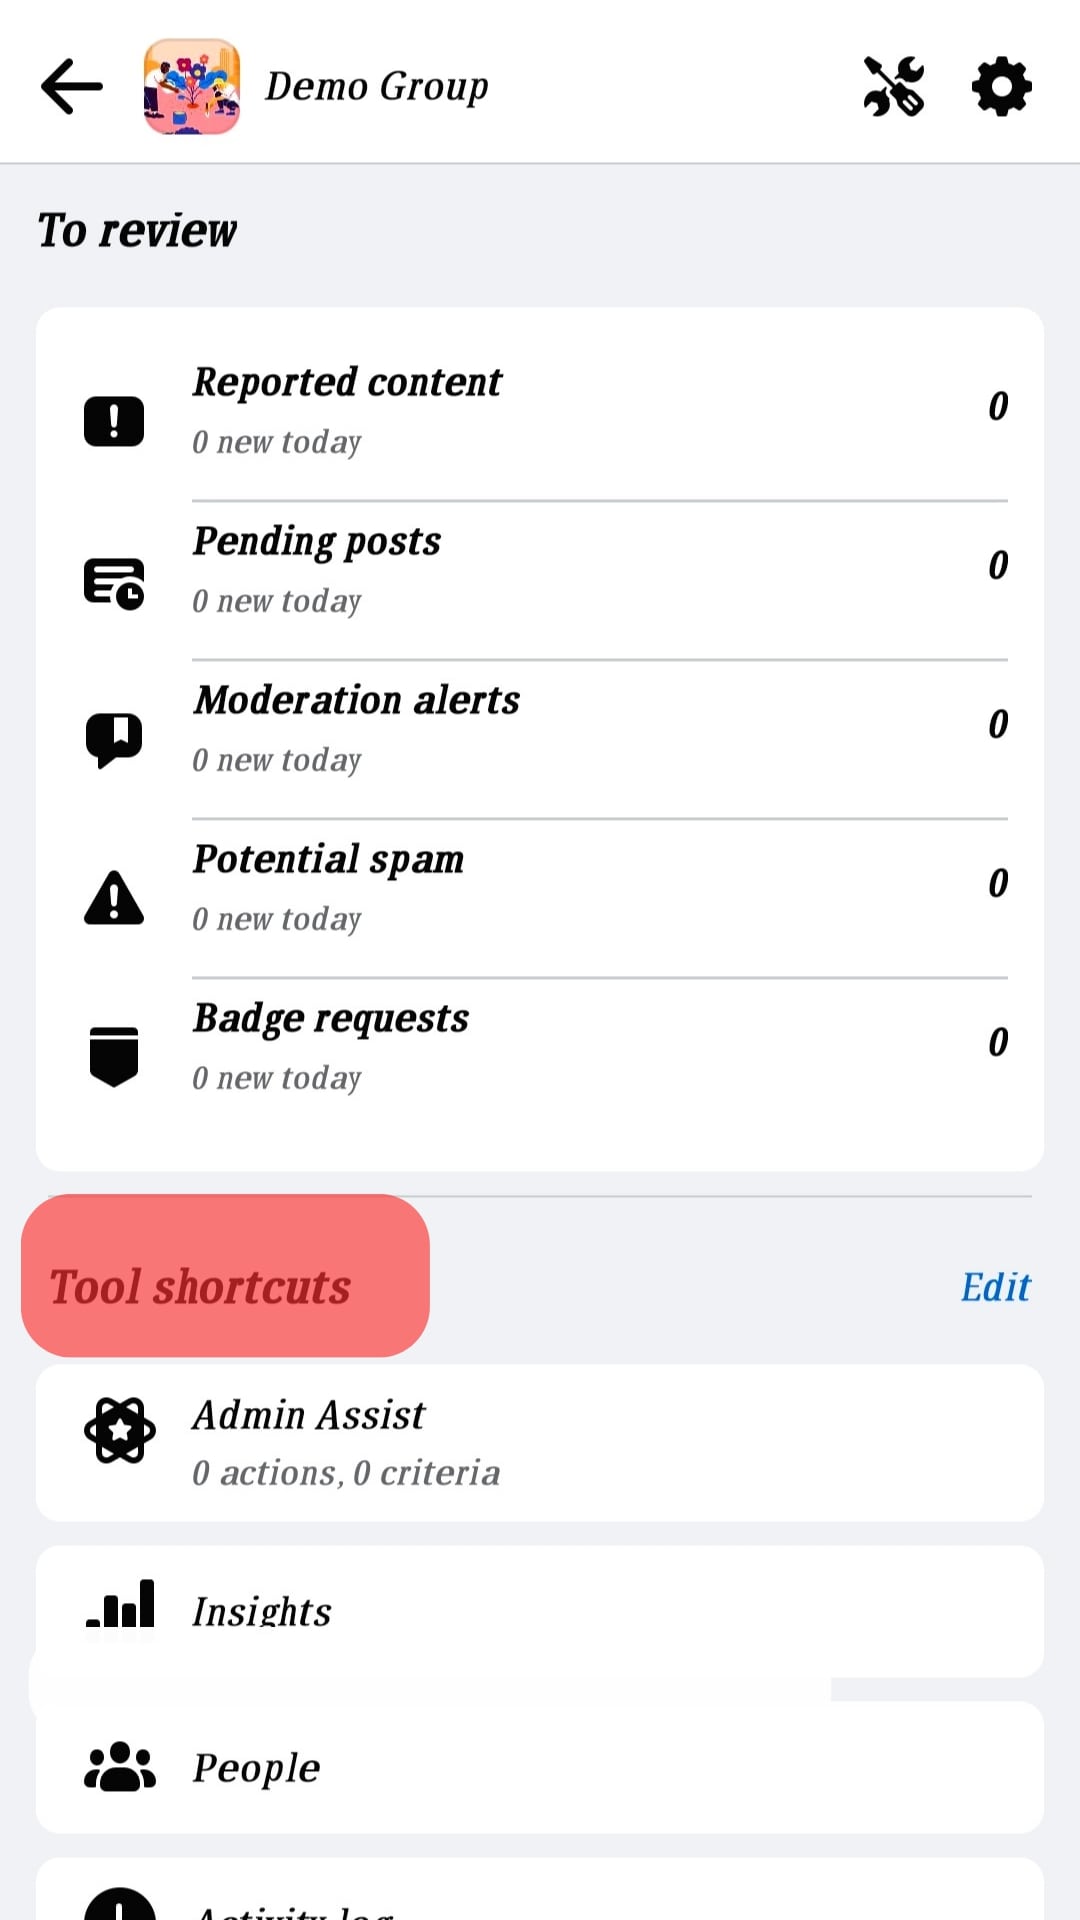 A List Of Your Tools Shortcut Will Appear.